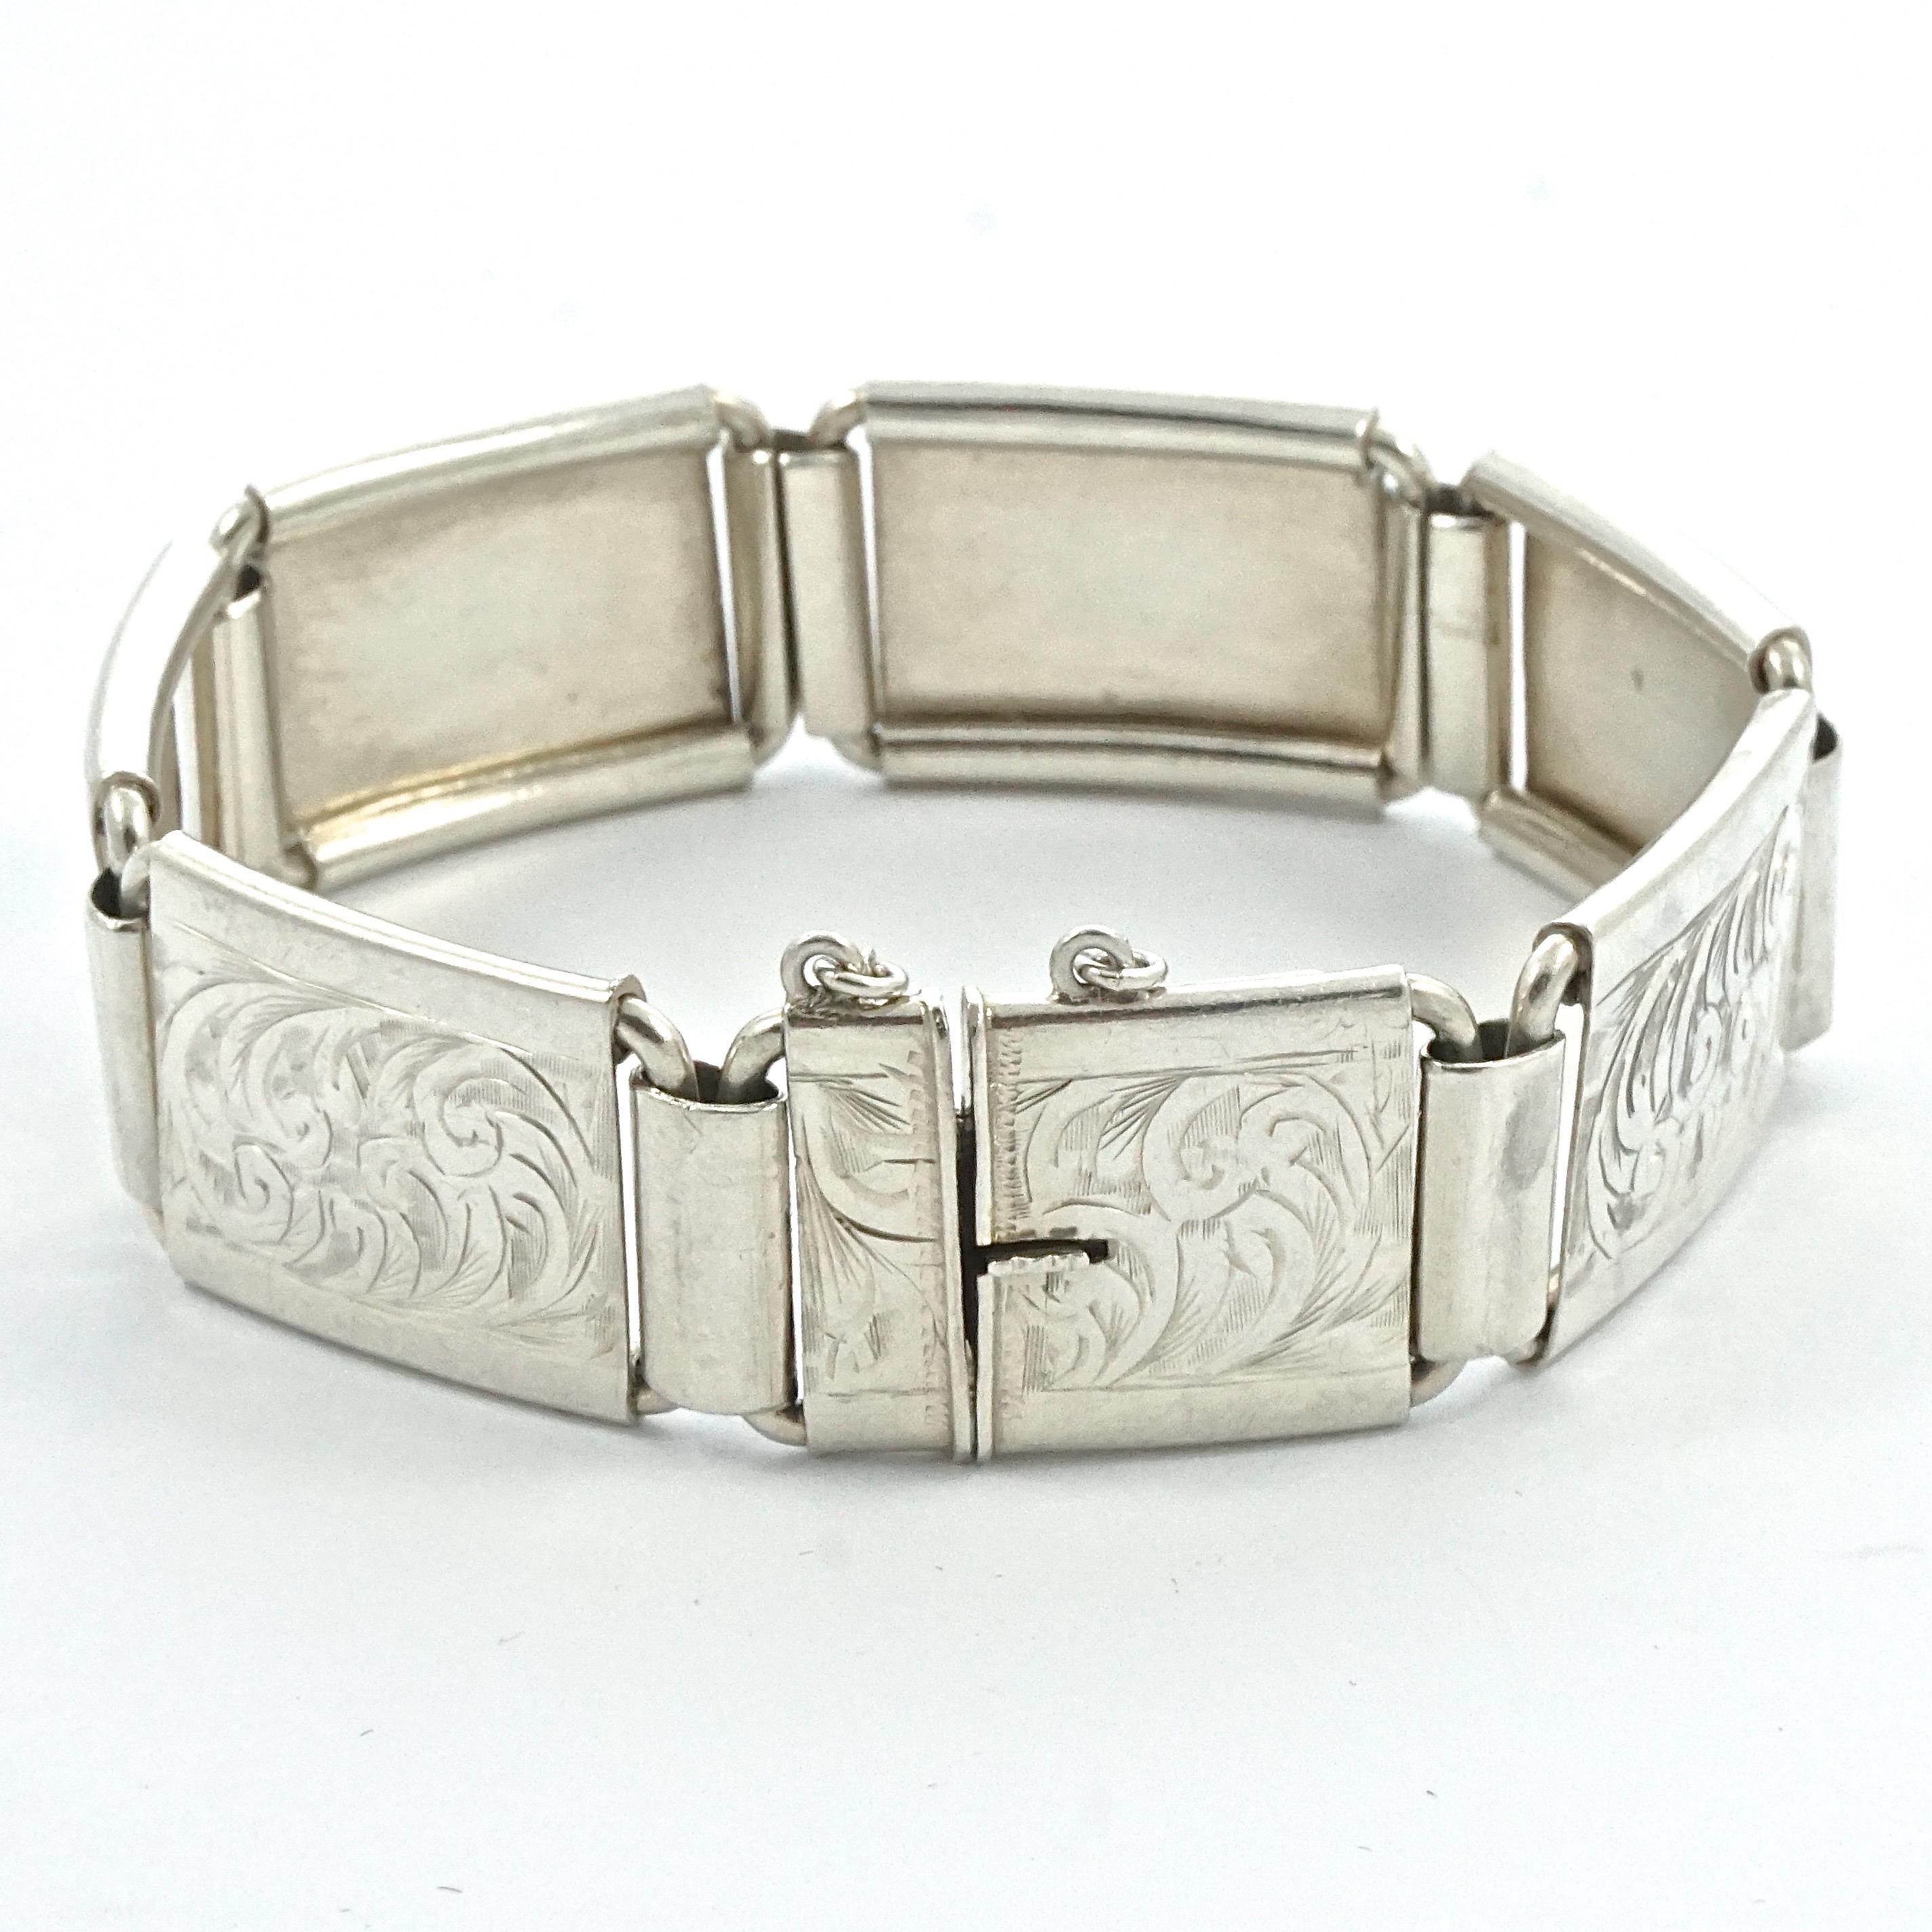 English silver hand engraved scroll panel link bracelet with a safety chain. Measuring length 16.6cm / 6.5 inches by width 1.65cm / .65 inch. The bracelet is stamped 'Silver' and 'Made in England', and tests for silver. The bracelet is in good